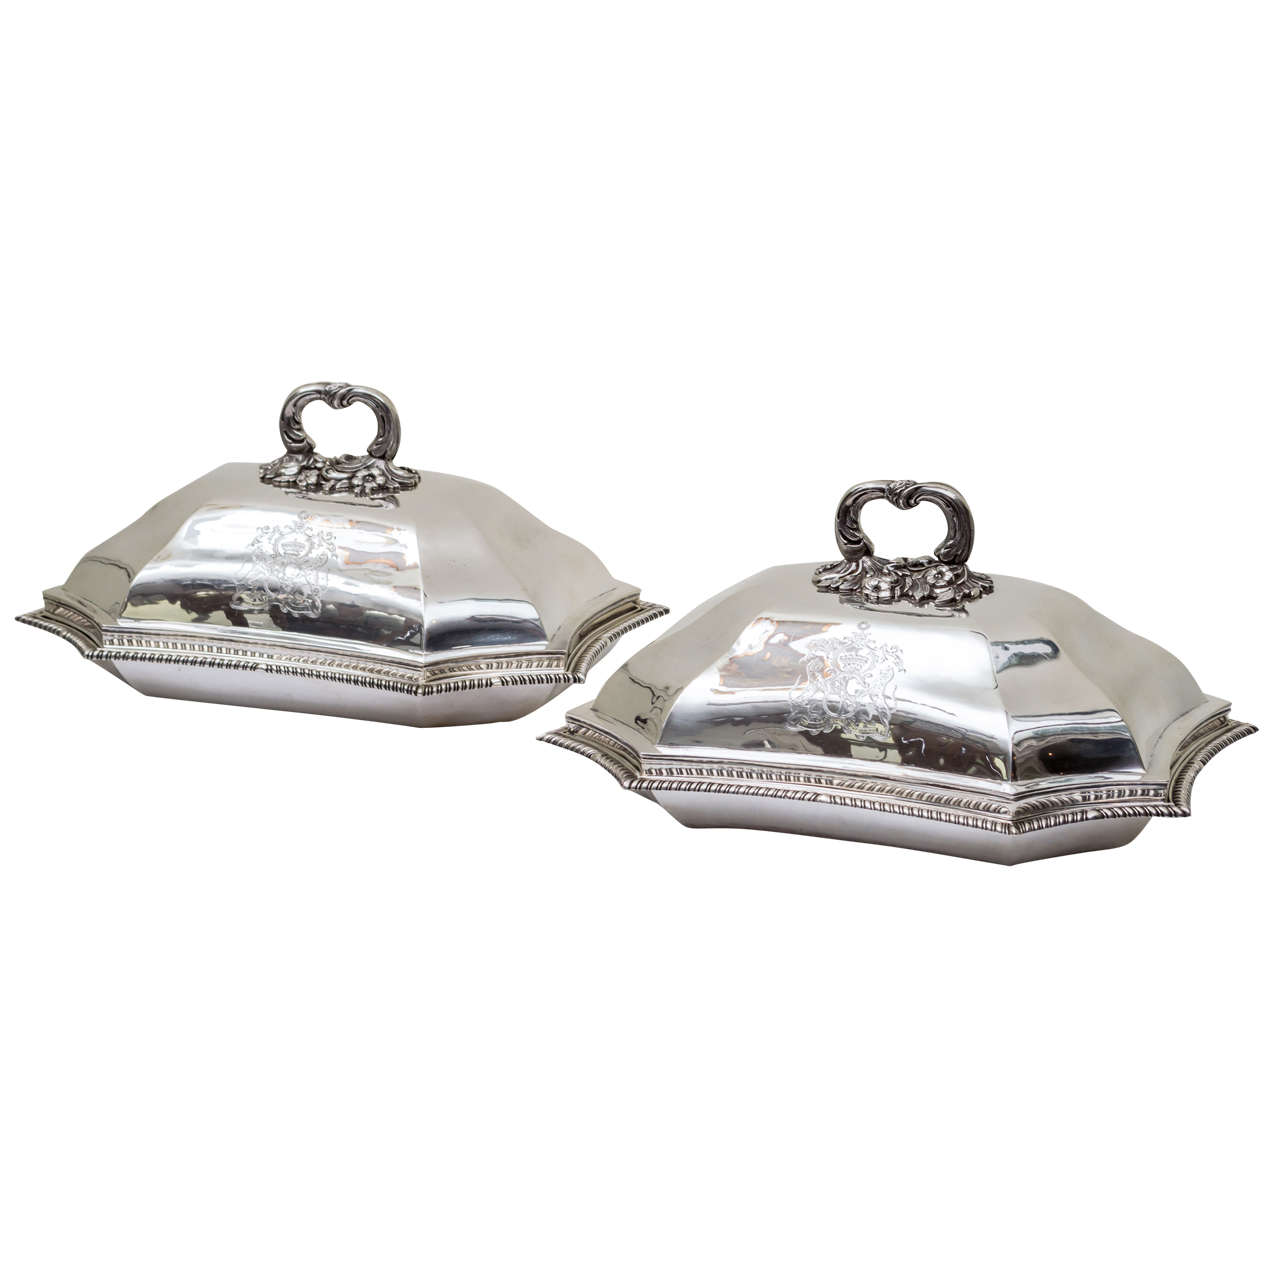 Early 19th Century Georgian Sterling Silver Covered Dishes with Armorials, Pair